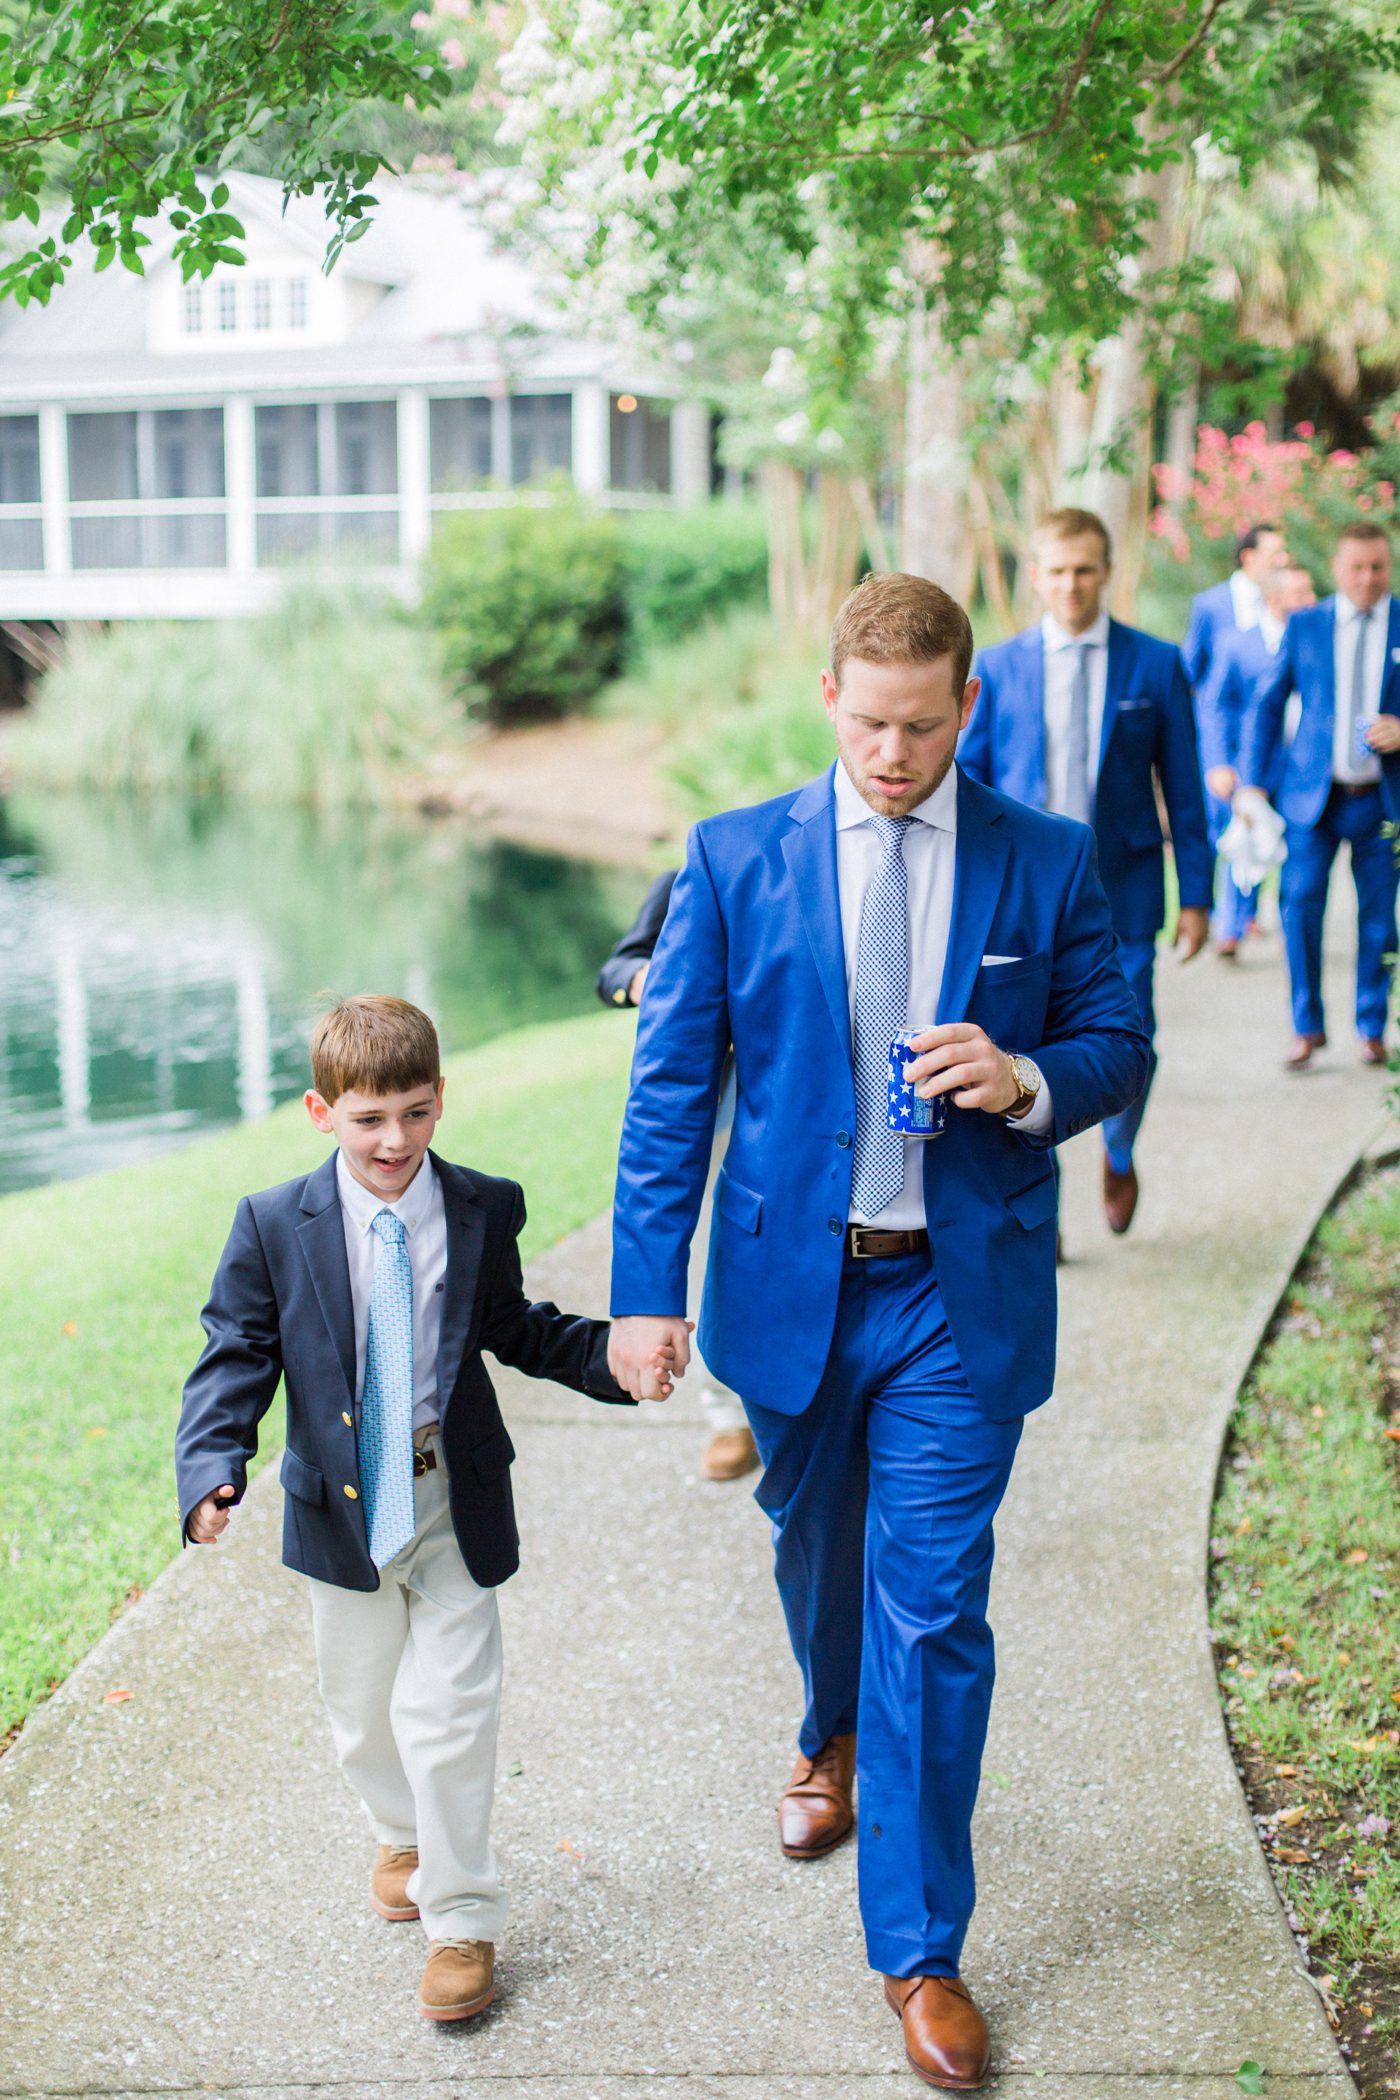 Groom walking with his ring bearer. Photo by Catherine Ann Photography